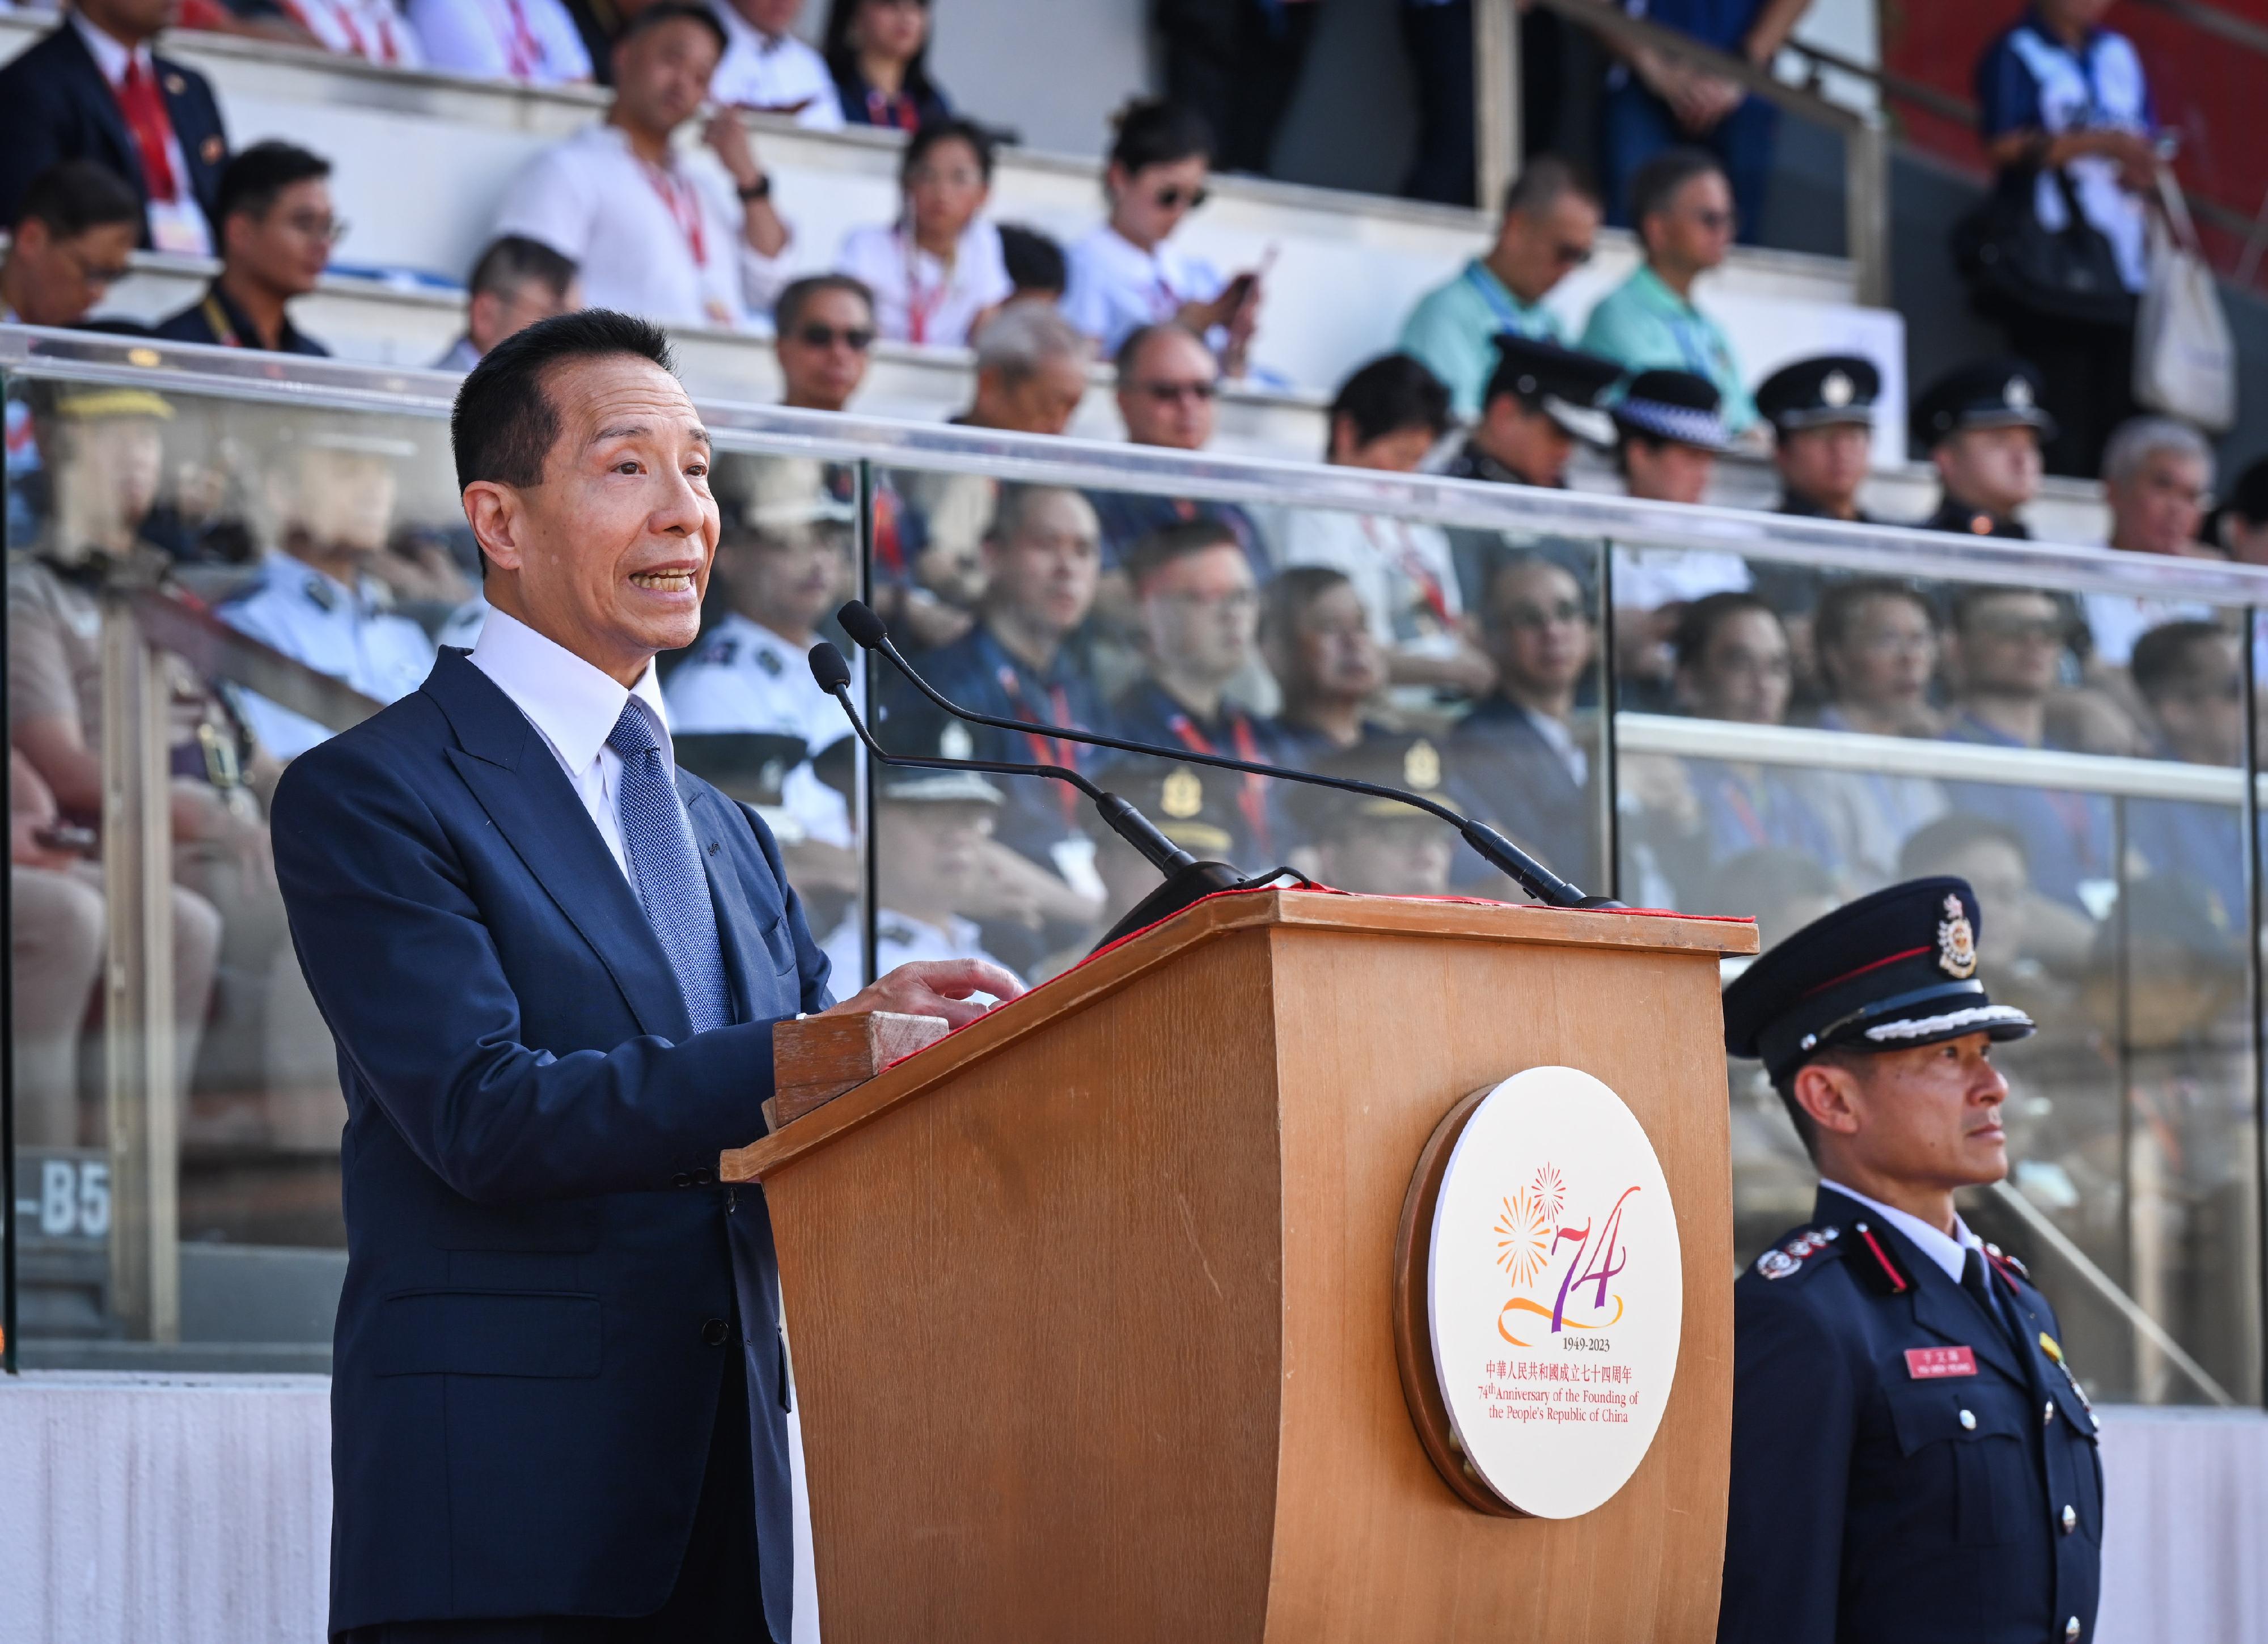 The Security Bureau led its disciplined services and auxiliary services, together with youth uniformed groups, to hold the Parade by Disciplined Services and Youth Groups cum Carnival for Celebrating the 74th Anniversary of the Founding of the People's Republic of China at the Fire and Ambulance Services Academy in Tseung Kwan O today (October 1) to celebrate the National Day with members of the public. Photo shows the officiating guest Mr Tang Yat-sun (first left) delivering a speech.